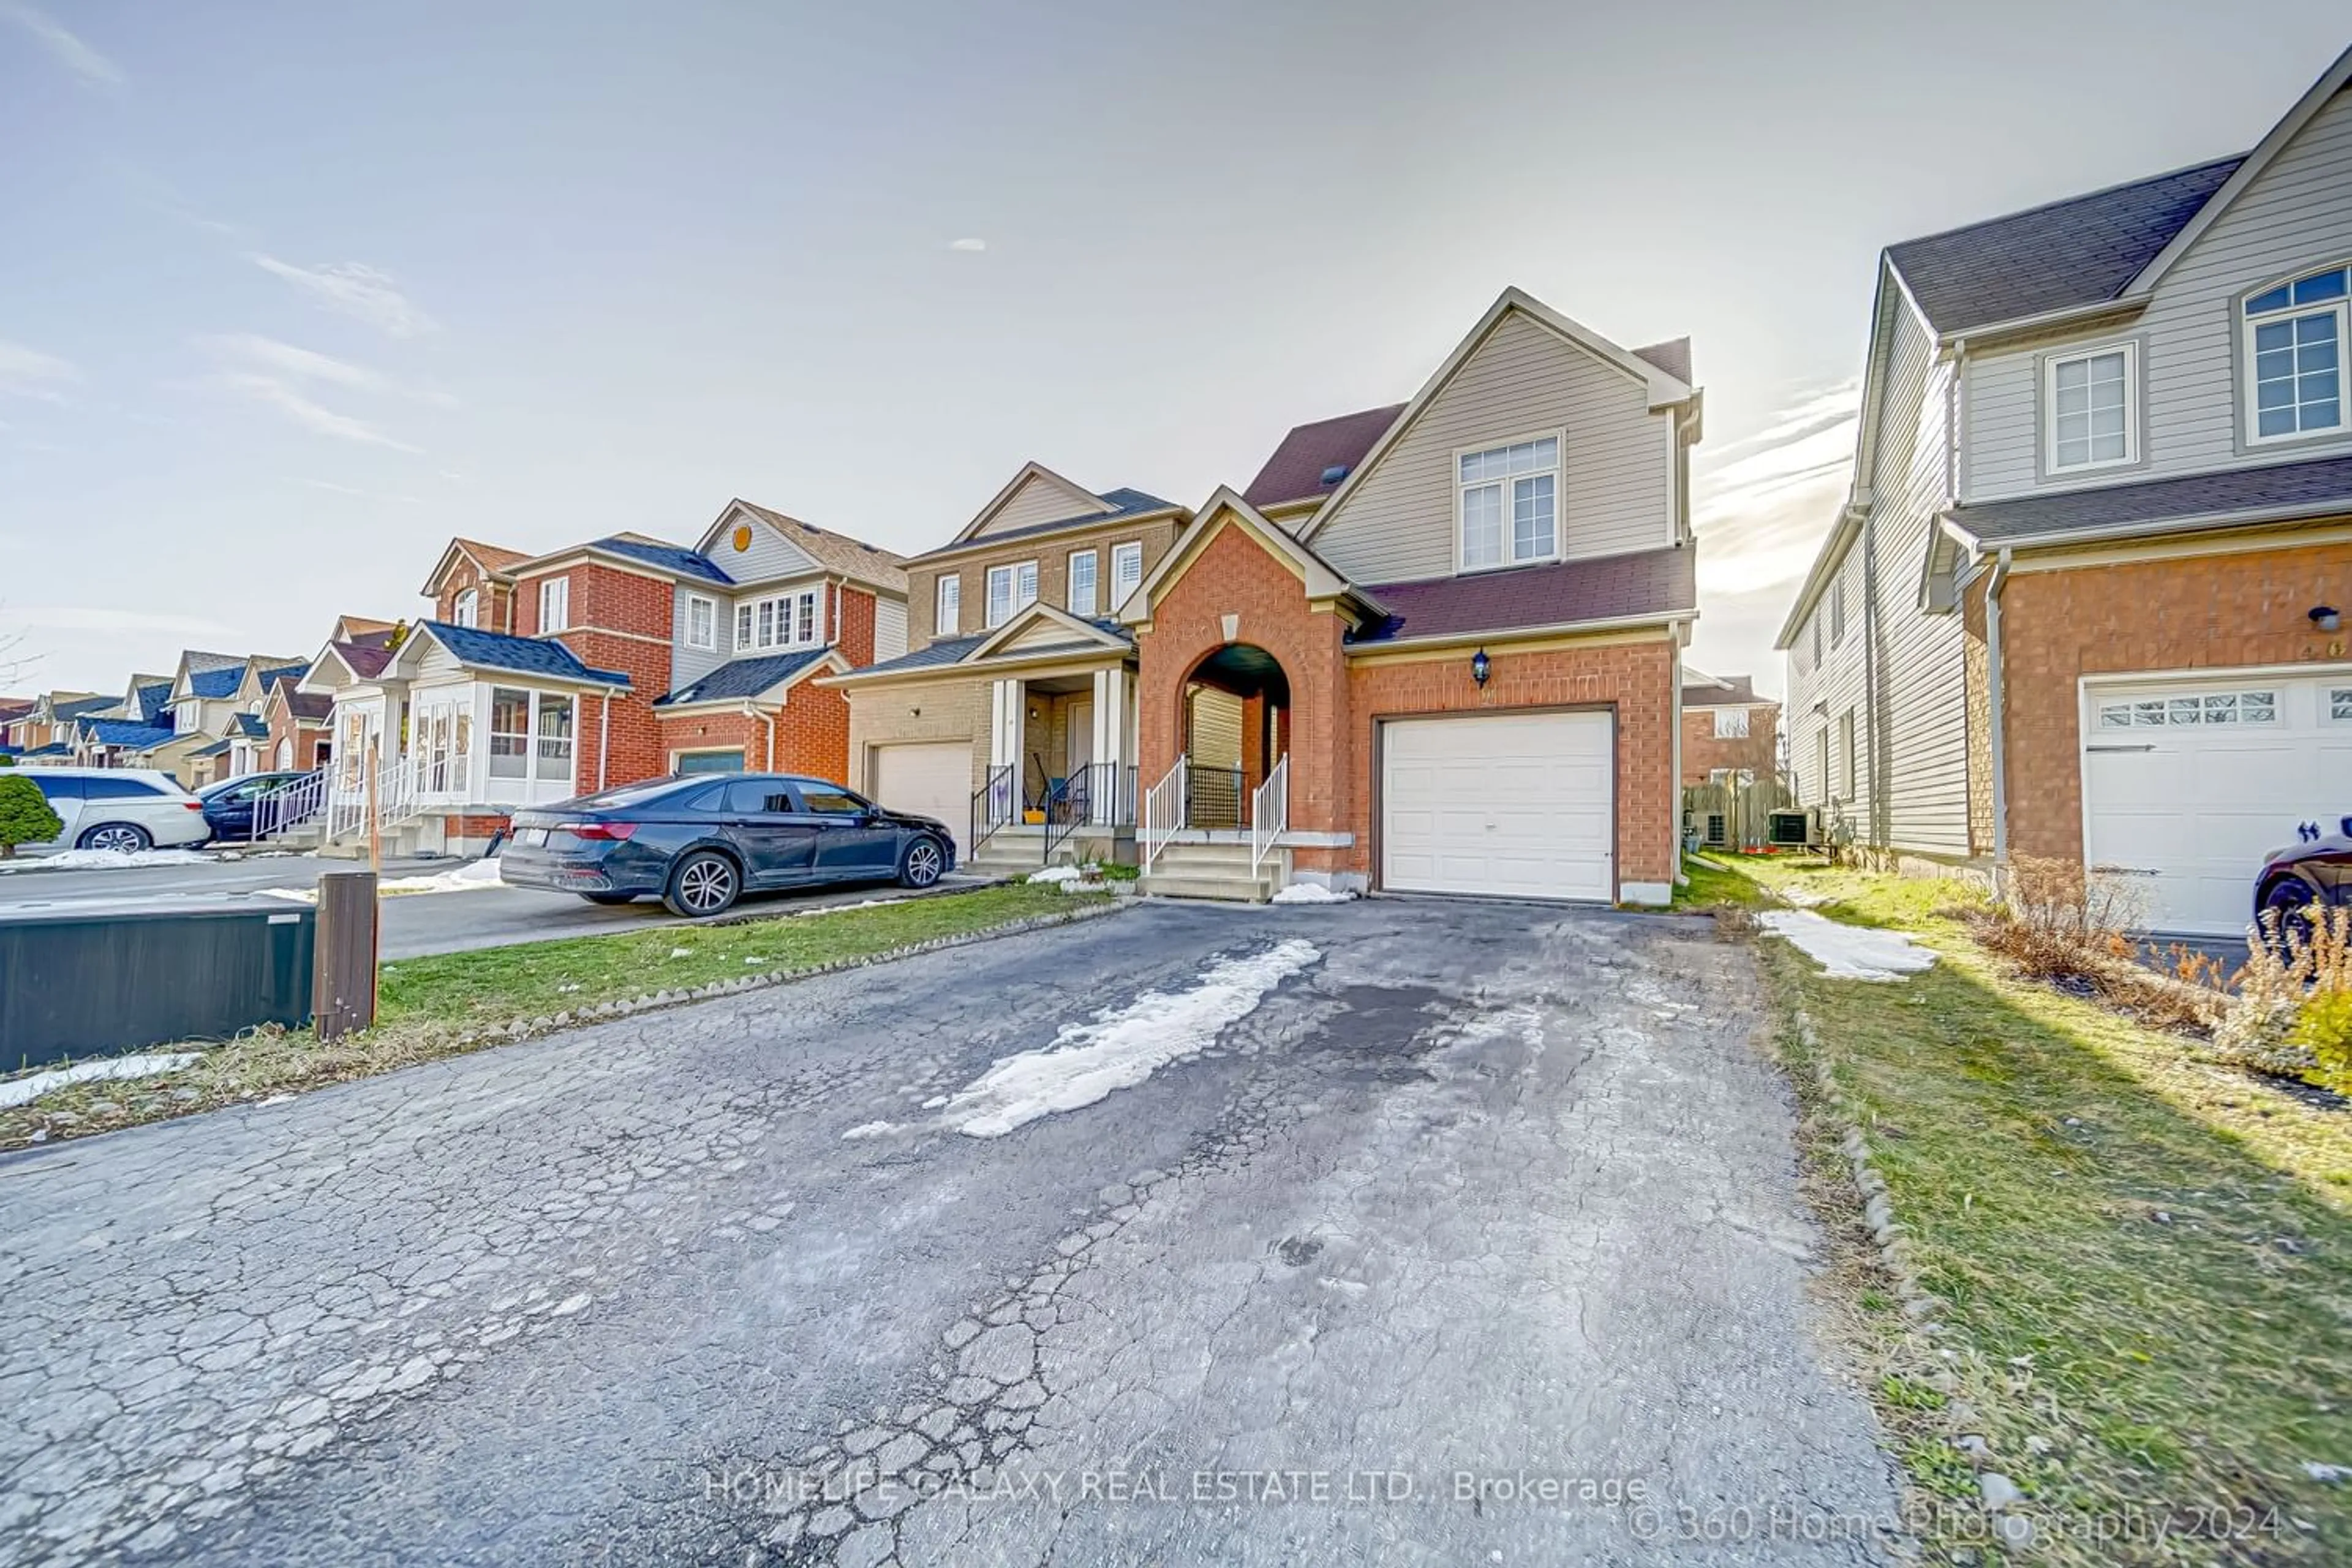 Street view for 38 Holloway Rd, Markham Ontario L3S 4P2